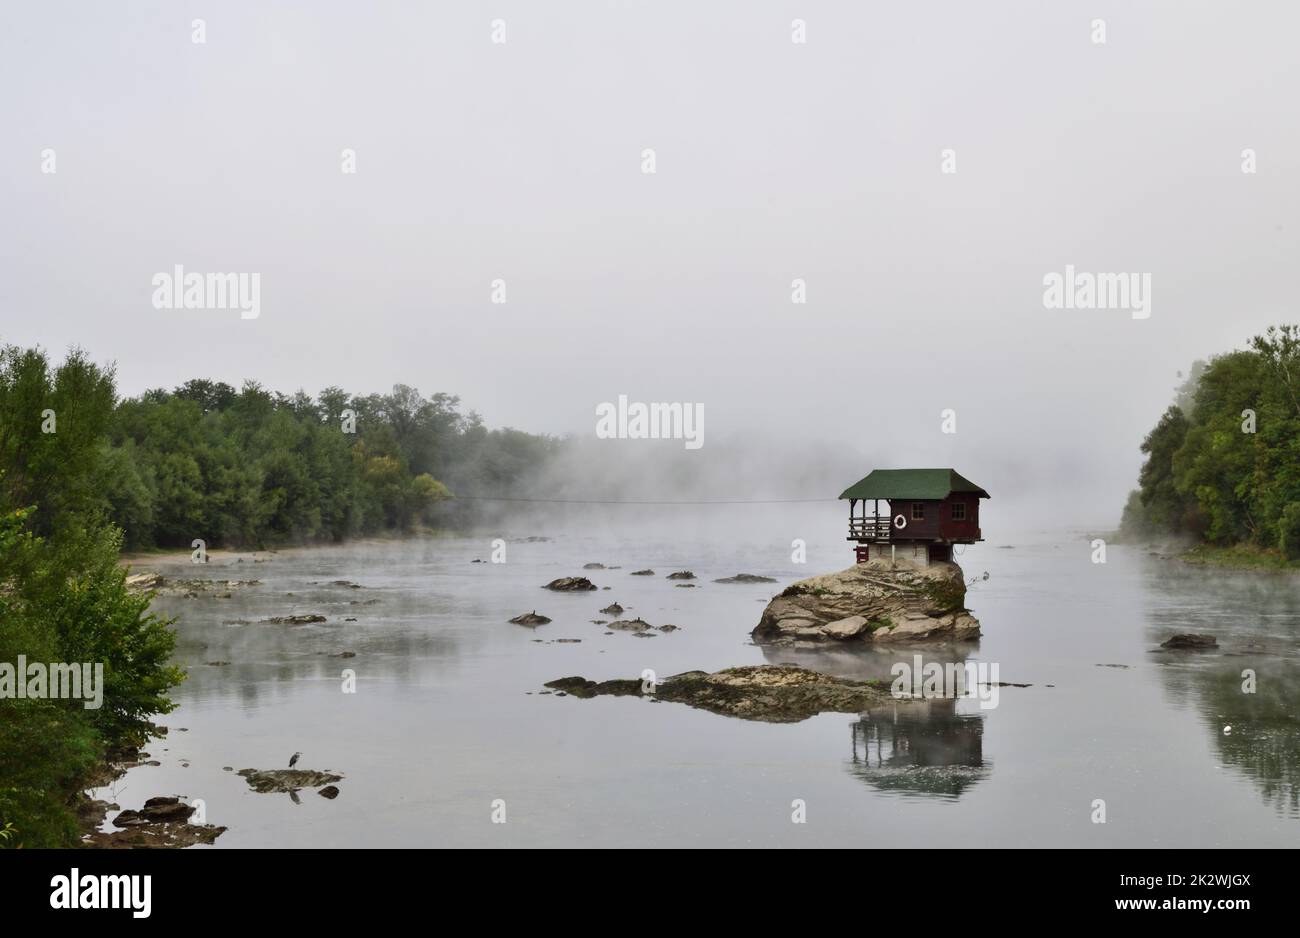 Iconic house on the Drina river between Serbia and Bosnia Herzegovina on a misty morning Stock Photo